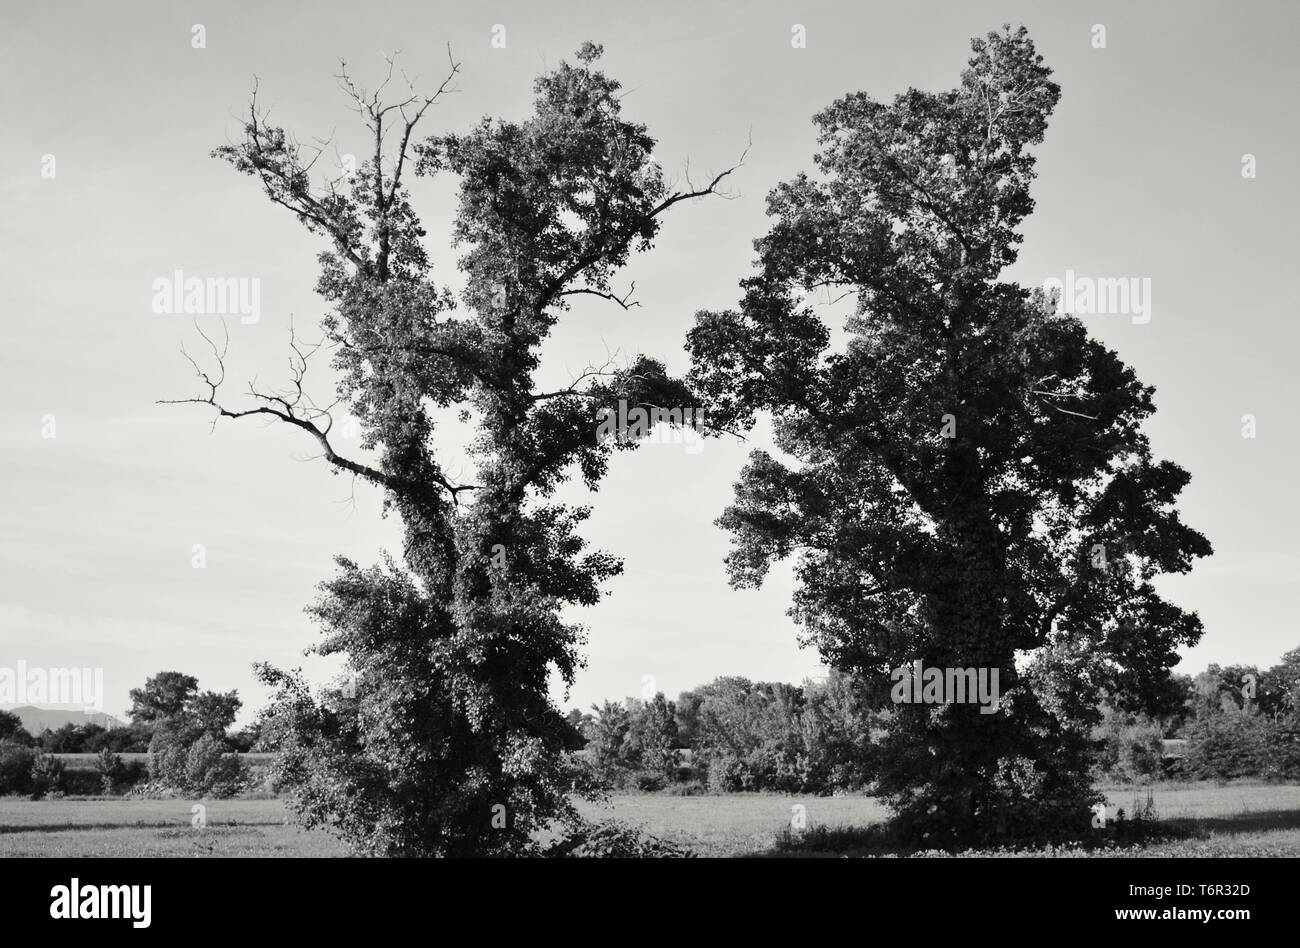 Two giant trees on a river bank, black and white photography Stock Photo